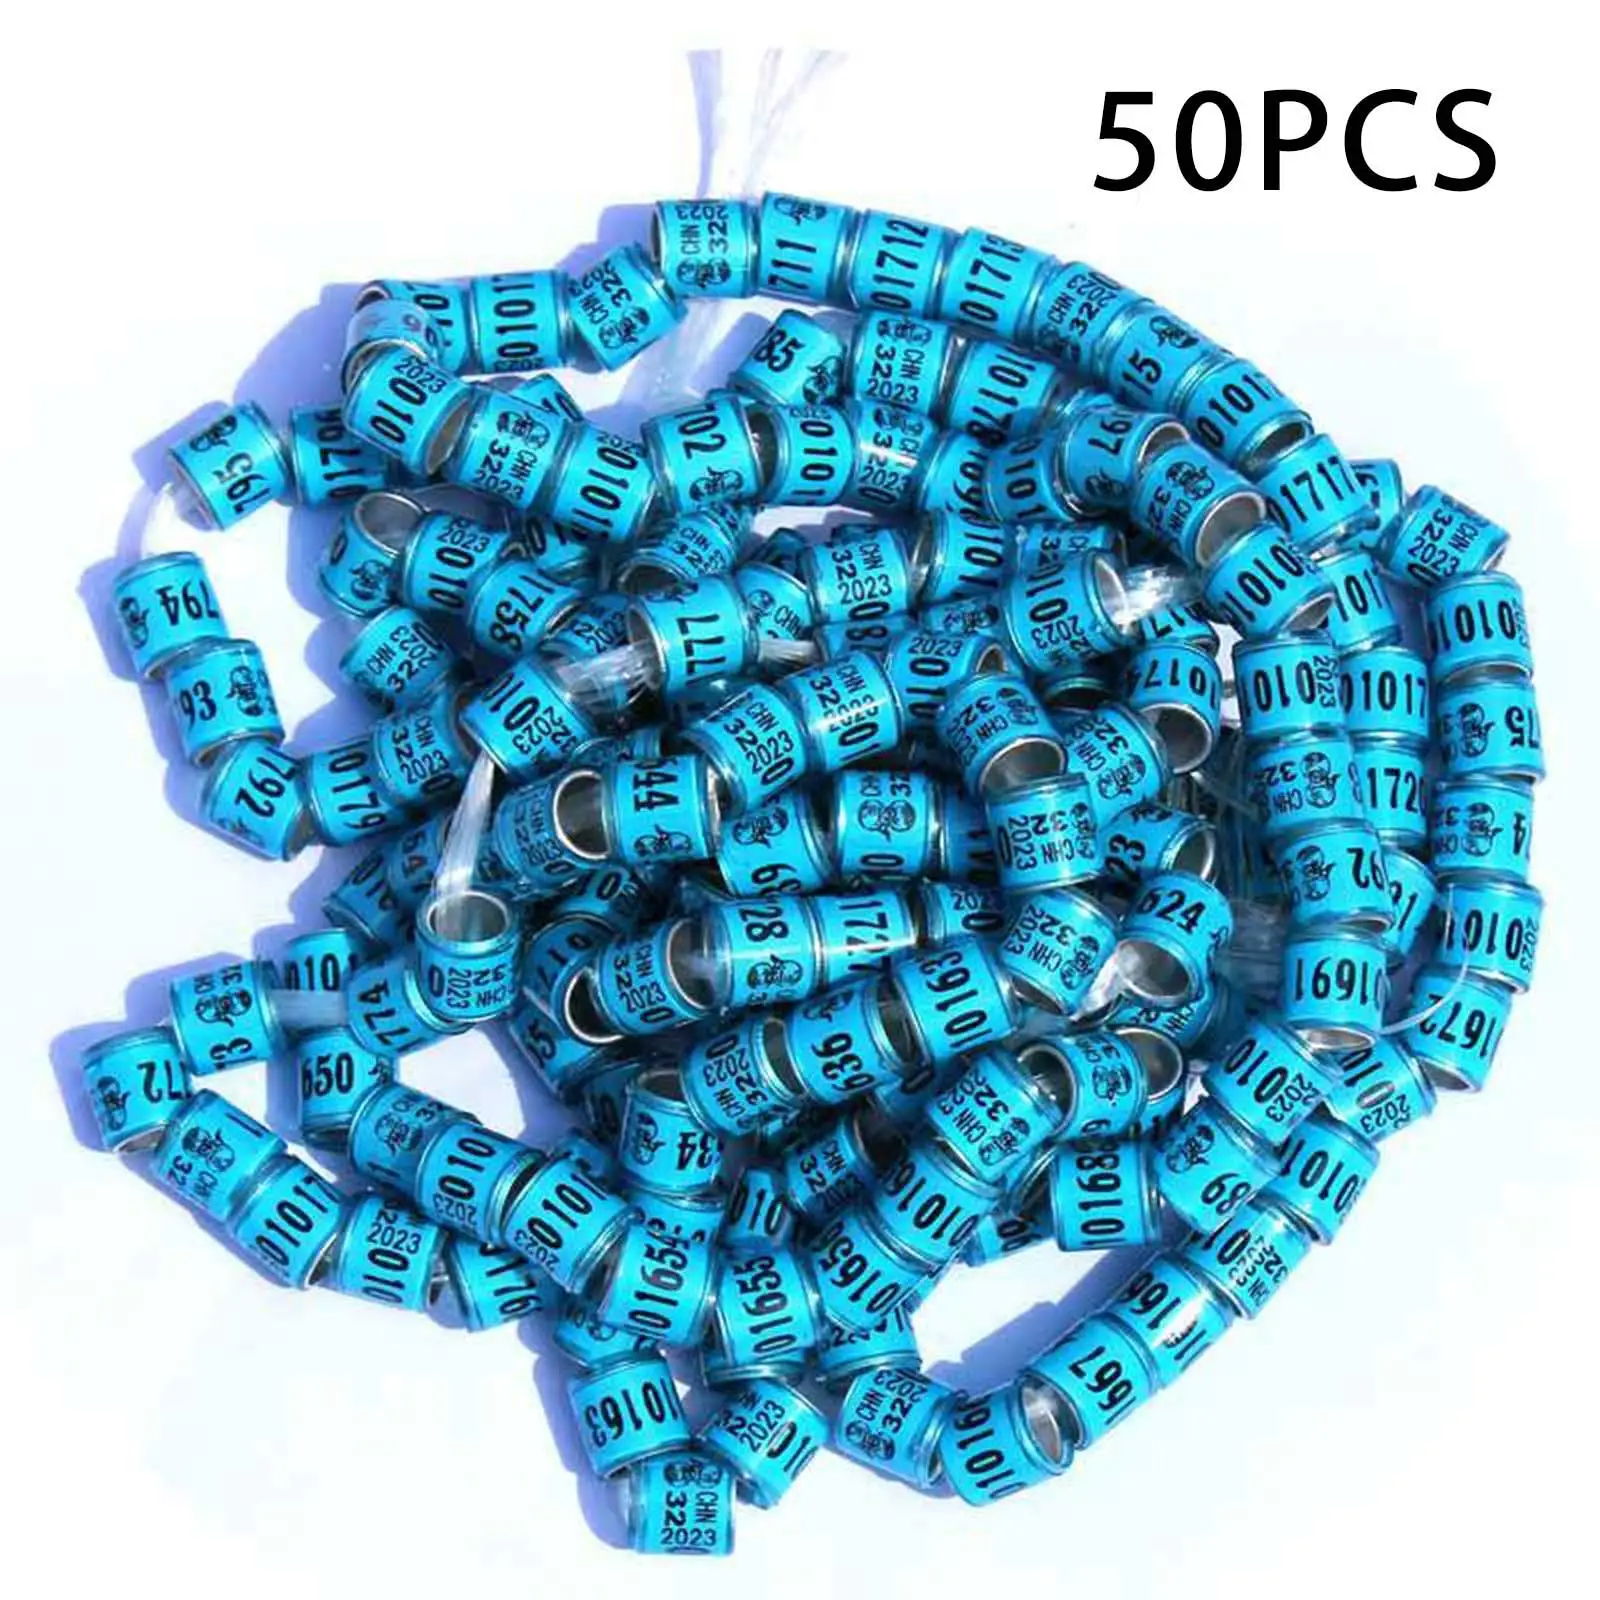 50pcs 2023 Racing Pigeon Leg Rings Numbered Dove Foot Bands for Bantam Finch